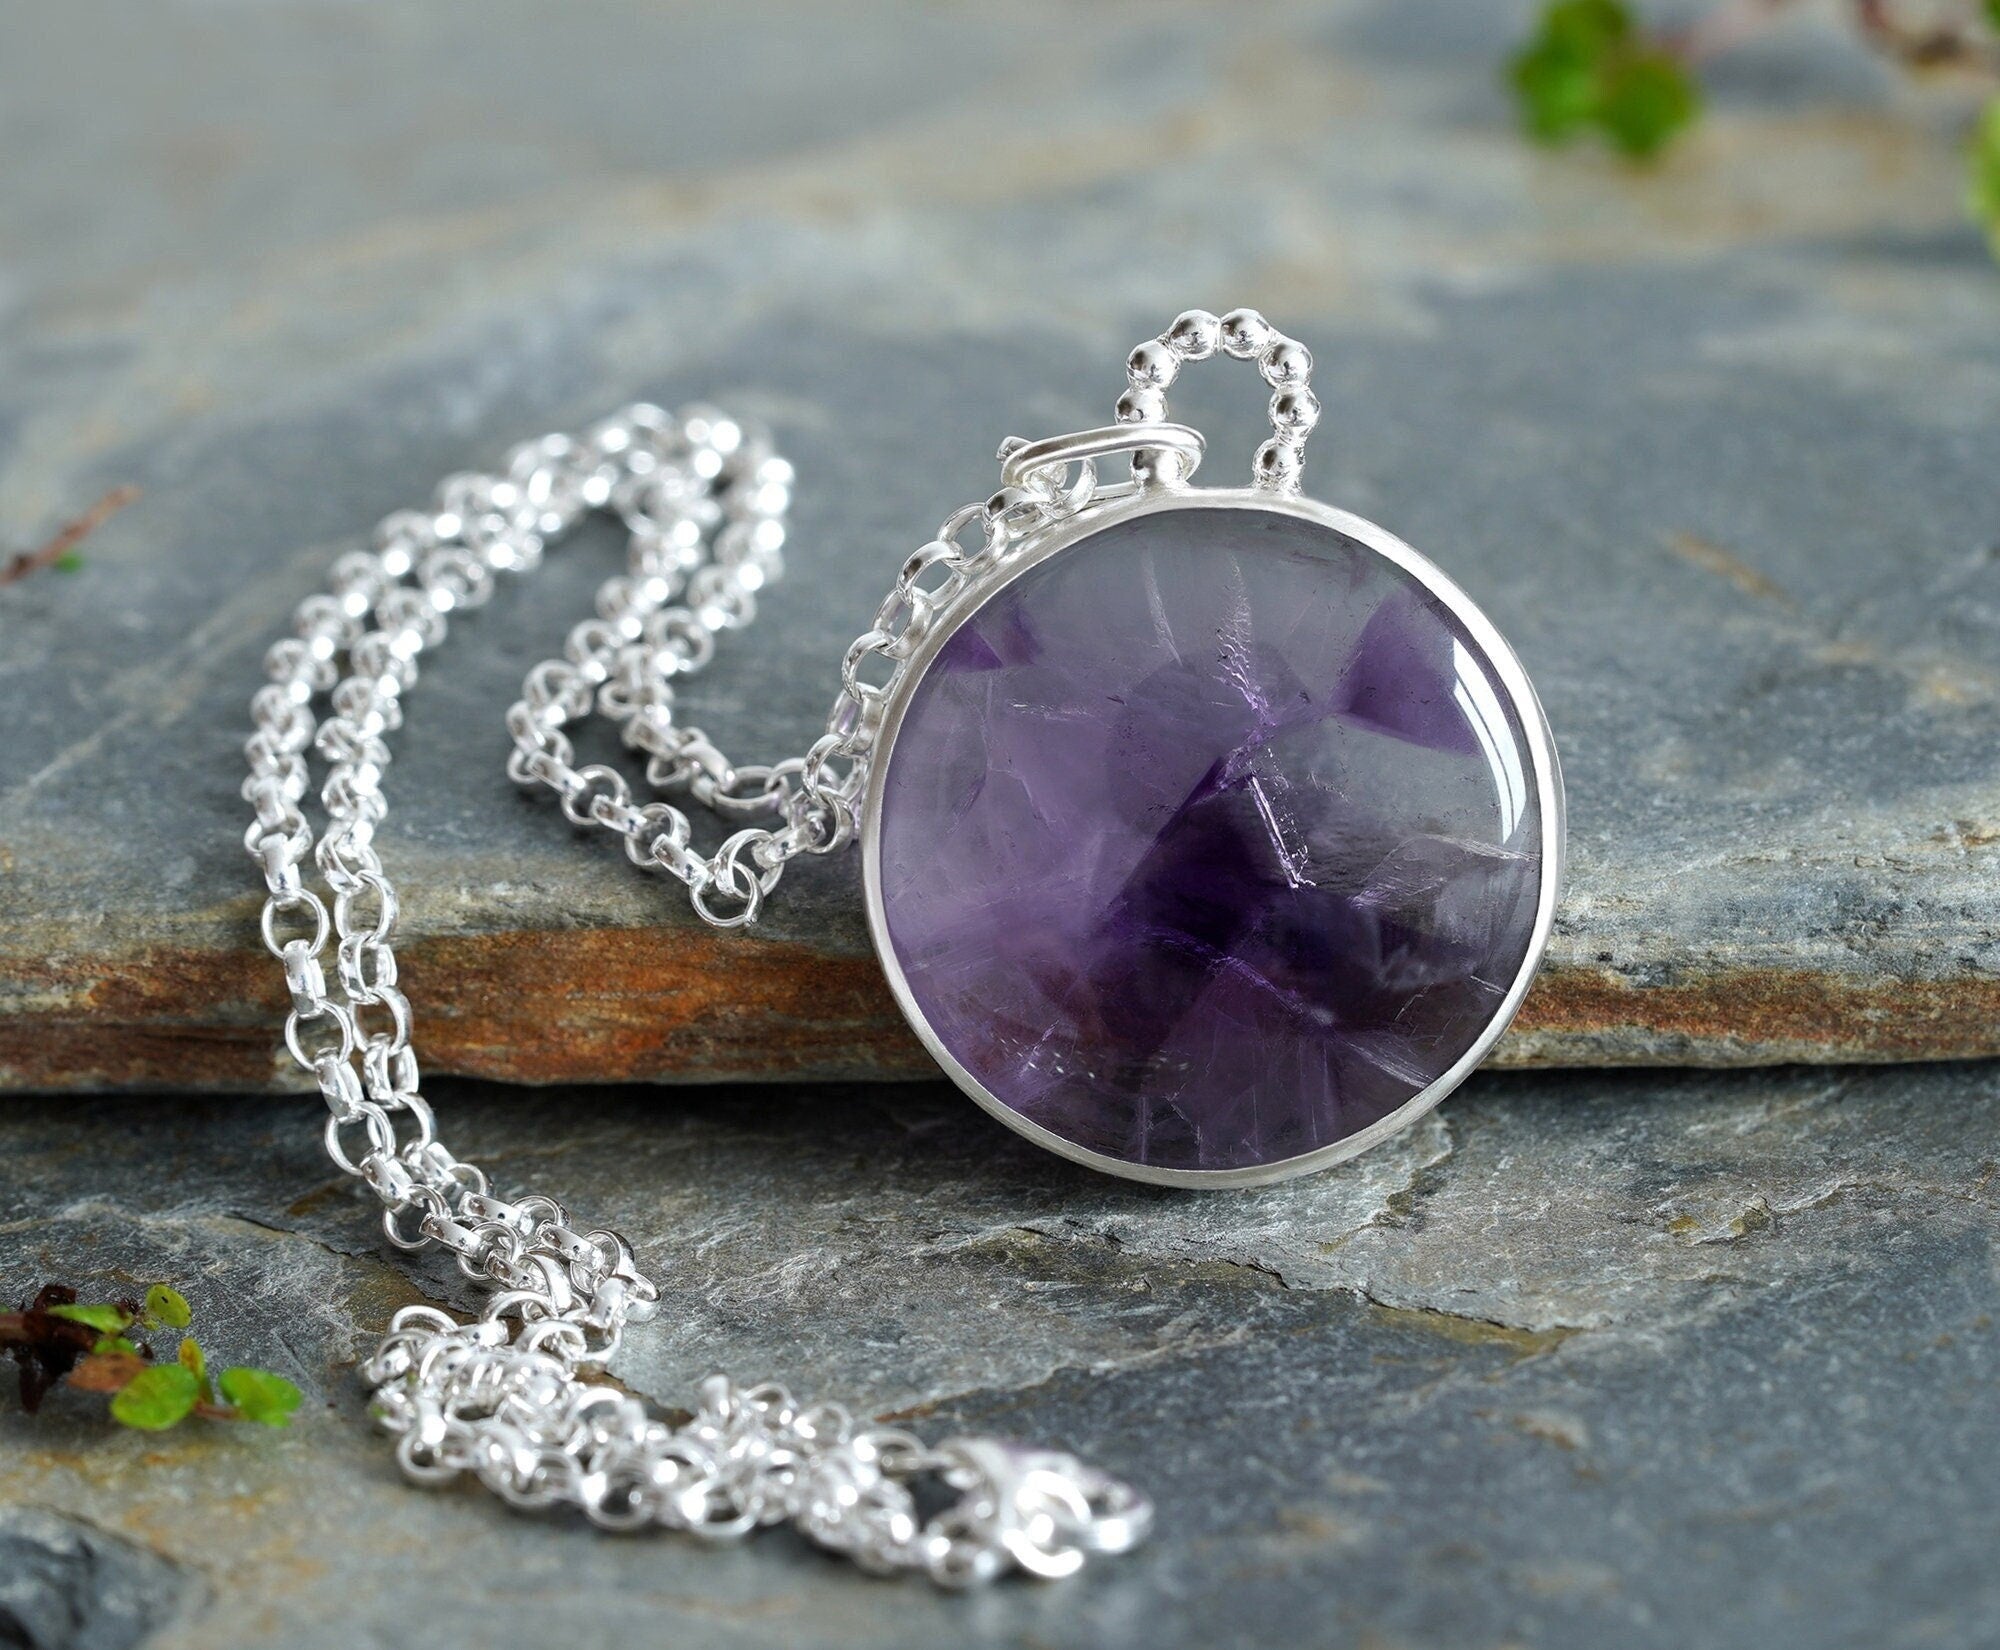 Amethyst Necklace / Sterling Silver Amethyst Necklace / Oval Amethyst  Pendant / Large Purple Amethyst Necklace / February Gemstone